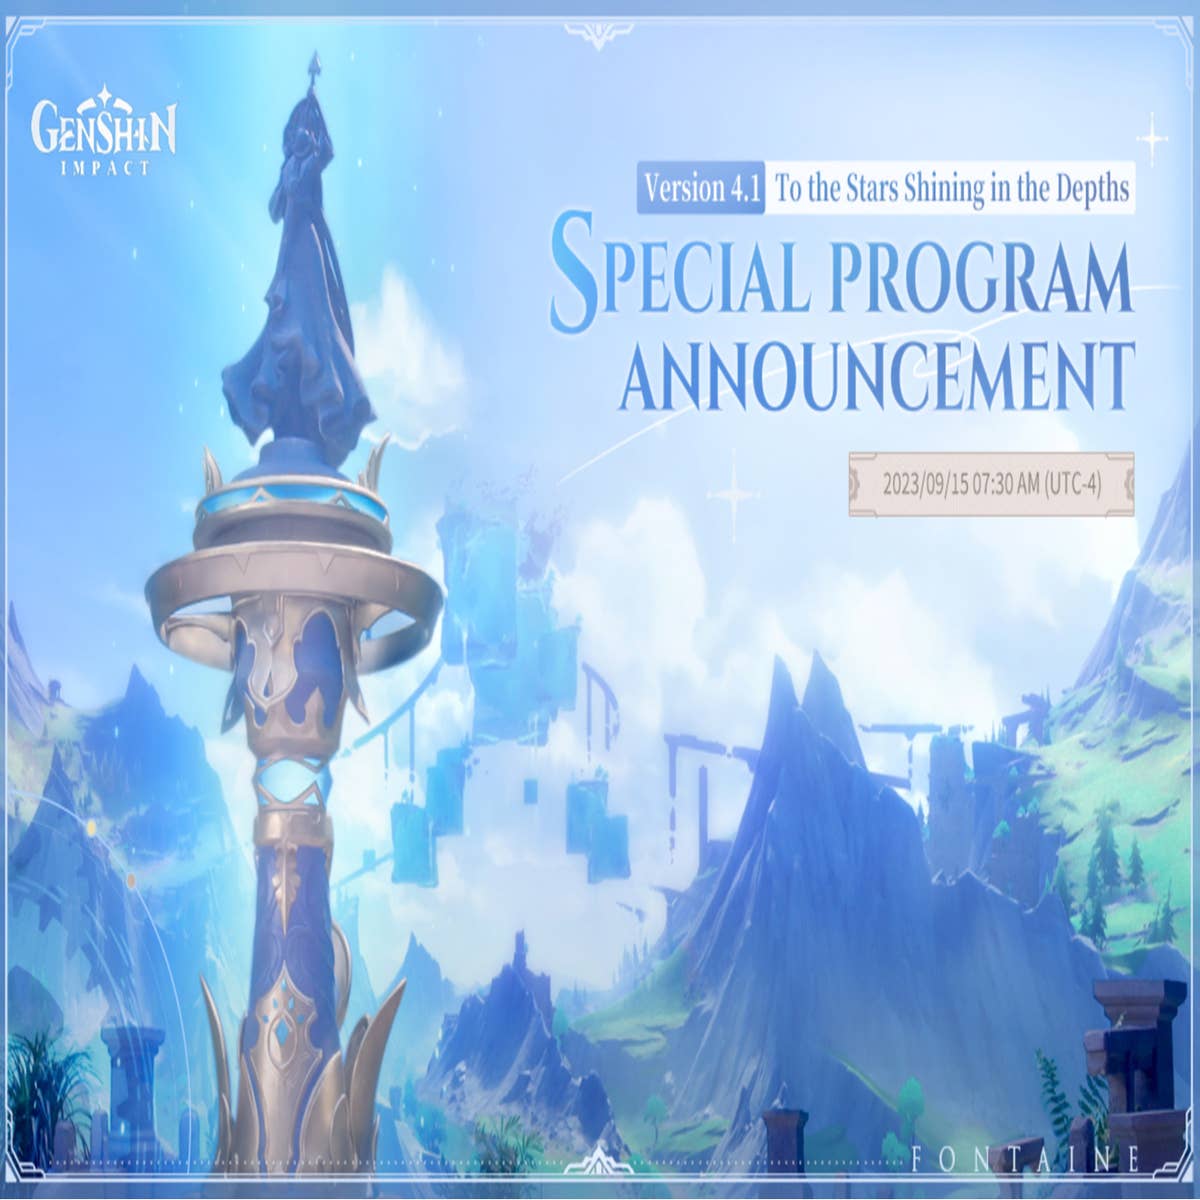 Genshin Impact 4.0 Fontaine reveal livestream set for this Friday